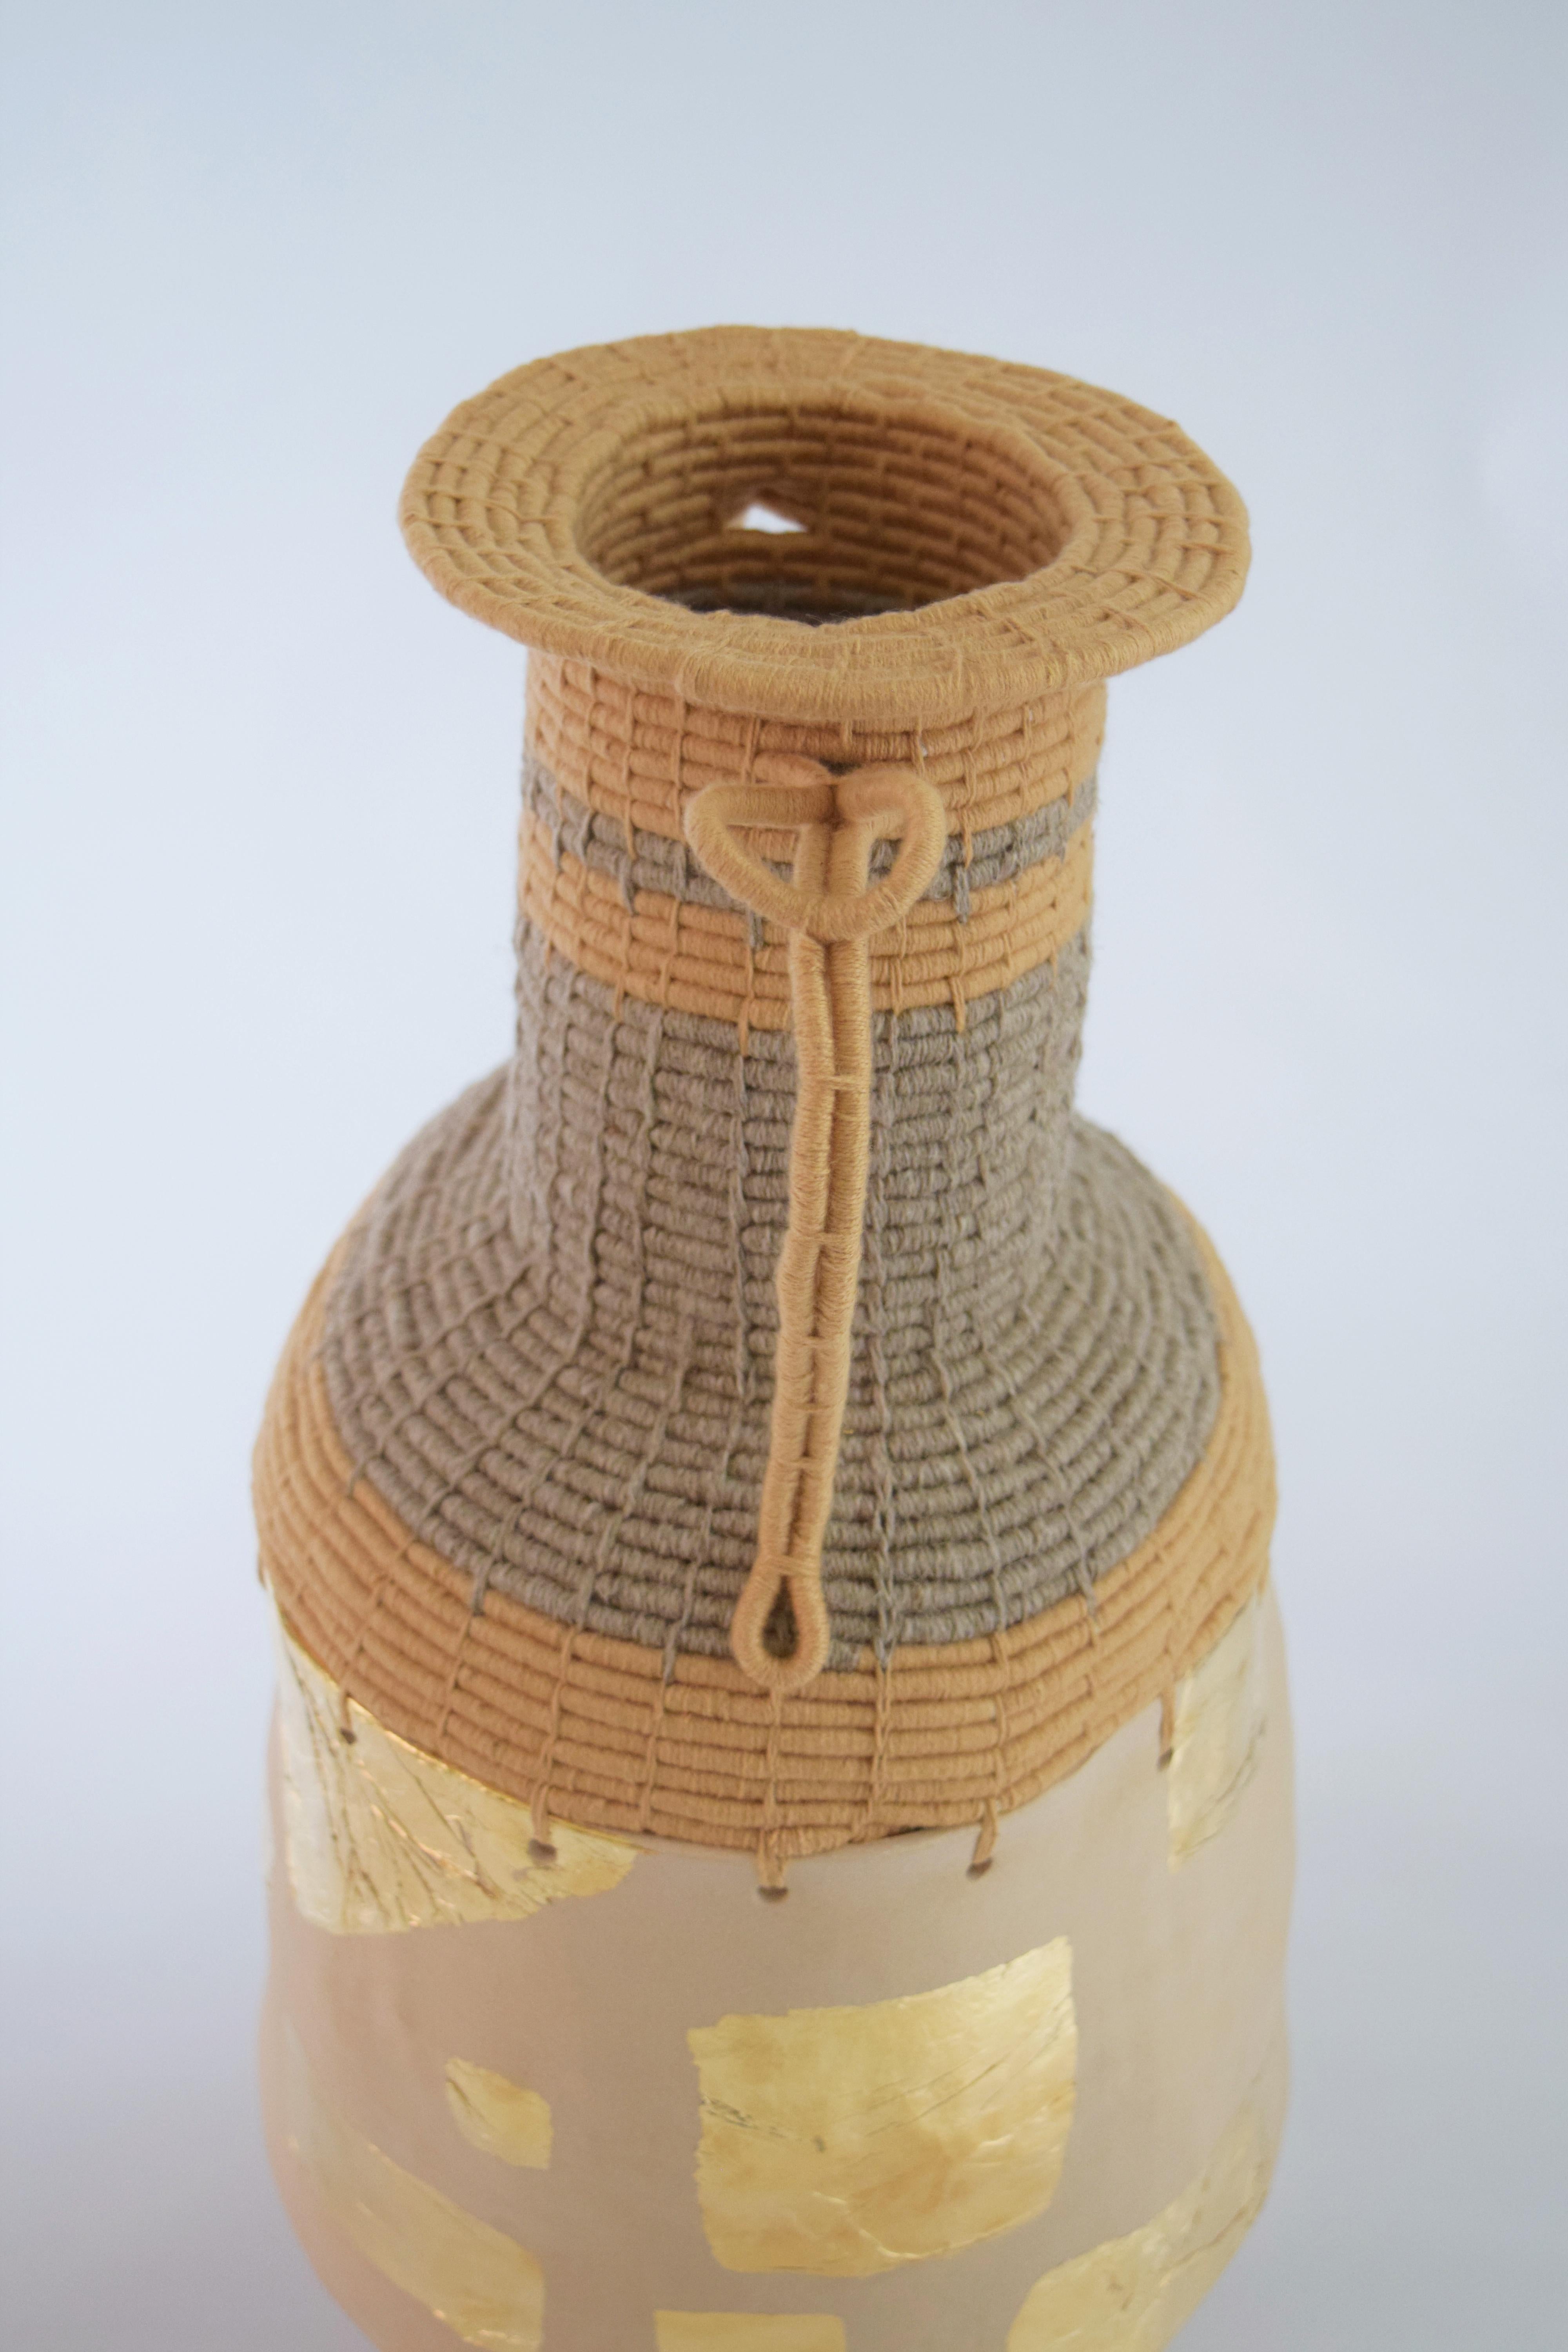 American One of a Kind Ceramic and Woven Cotton/Linen Vessel with Applied Gold Foil